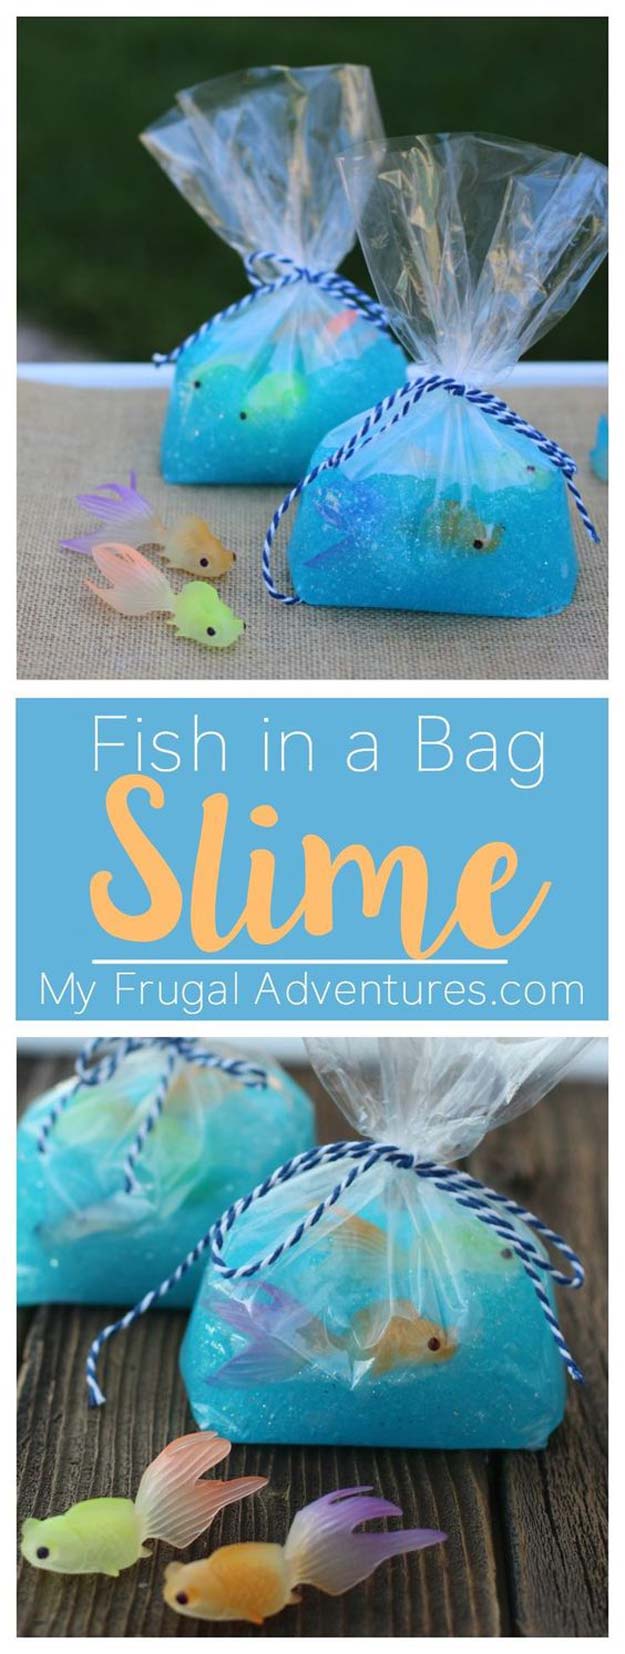 Best DIY Slime Recipes - DIY Fish in a Bag Slime - Cool and Easy Slime Recipe Ideas Without Glue, Without Borax, For Kids, With Liquid Starch, Cornstarch and Laundry Detergent - How to Make Slime at Home - Fun Crafts and DIY Projects for Teens, Kids, Teenagers and Teens - Galaxy and Glitter Slime, Edible Slime #slime #slimerecipes #slimes #diyslime #teencrafts #diyslime